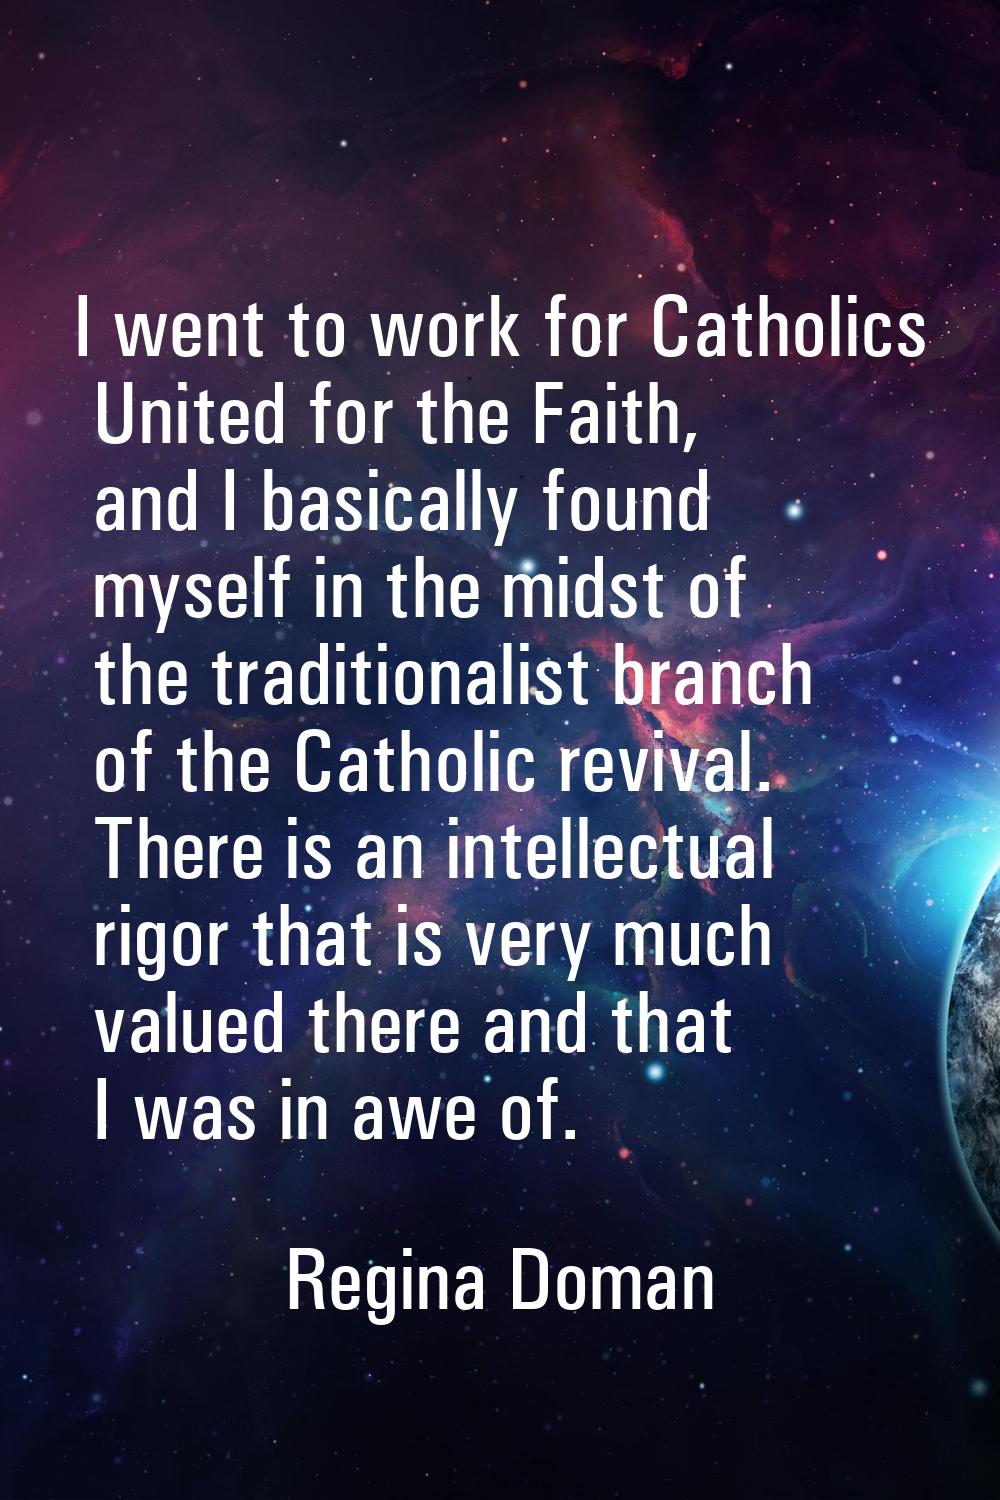 I went to work for Catholics United for the Faith, and I basically found myself in the midst of the